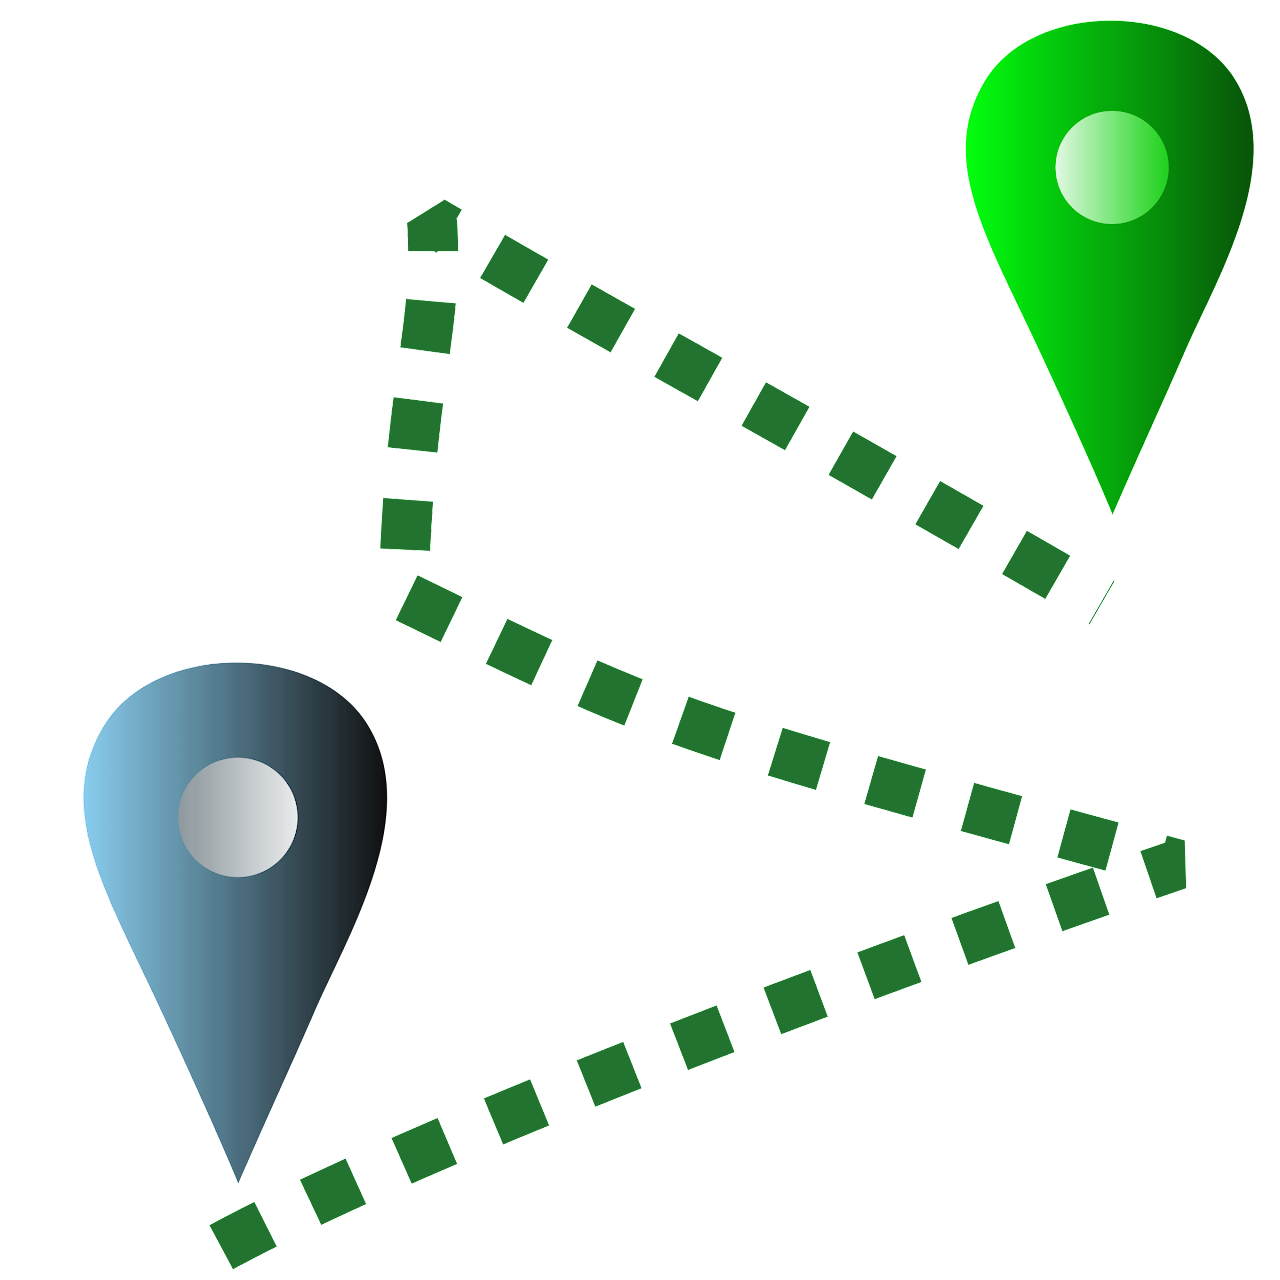 Animated image showing two location pins.